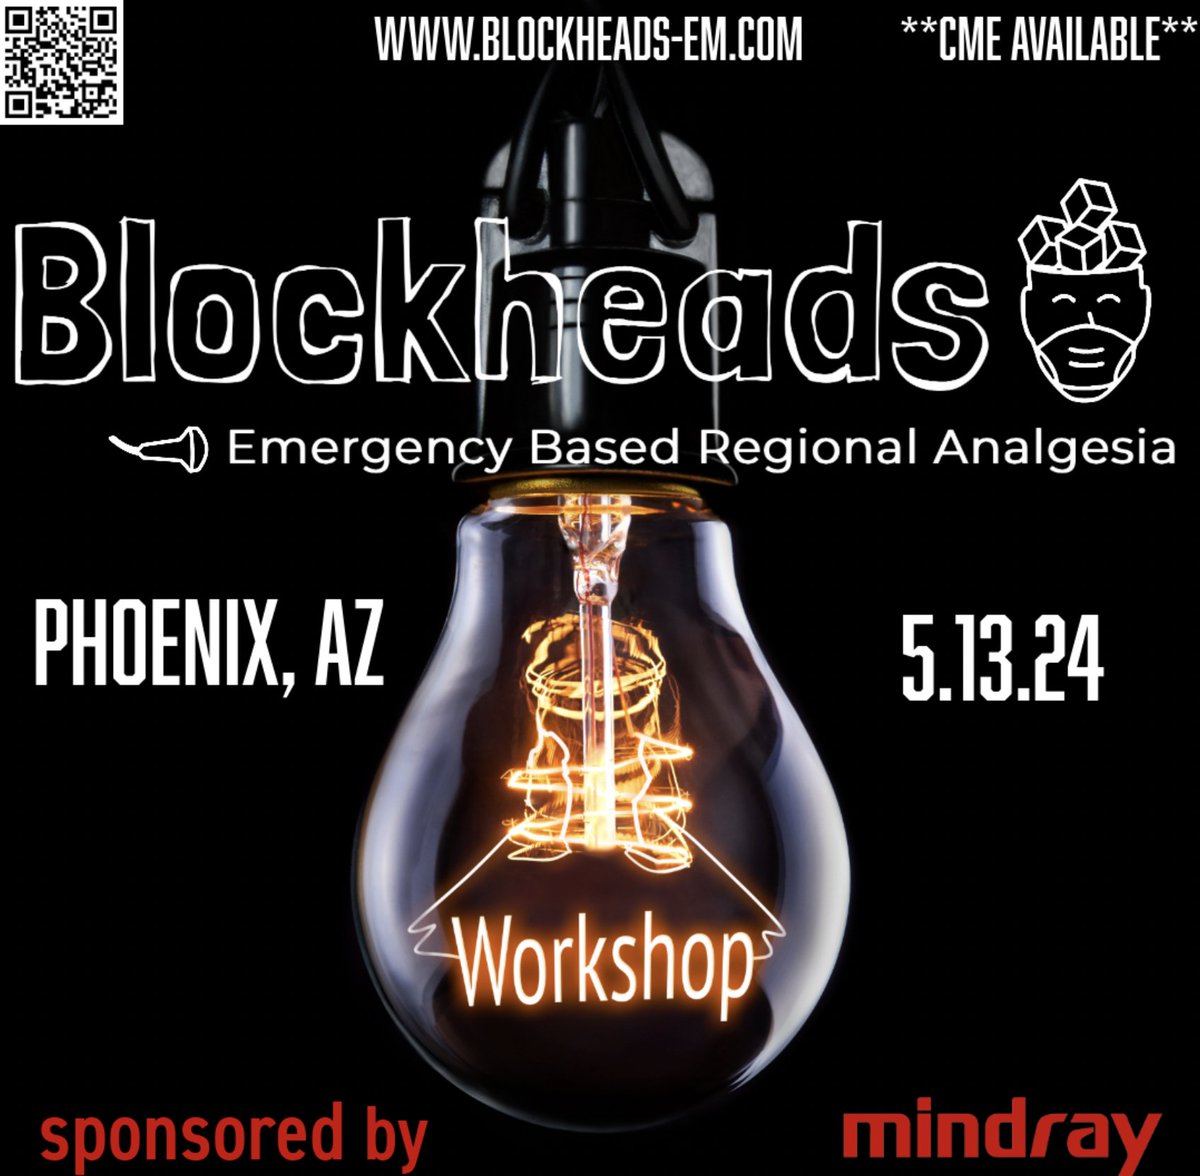 Finally here! Selling out quickly!. An ultrasound-guided nerve block course for ED clinicians. $500 w/CME. Learn, connect and improve patient care. @amit_pawa @coreultrasound @jeffgadsden @BlockIt_Hot_Pod @HGHED @GoldyMD @DanMirsch @RobFarrow_2 @NMDuggaNMD @judylin422 @TomJelic